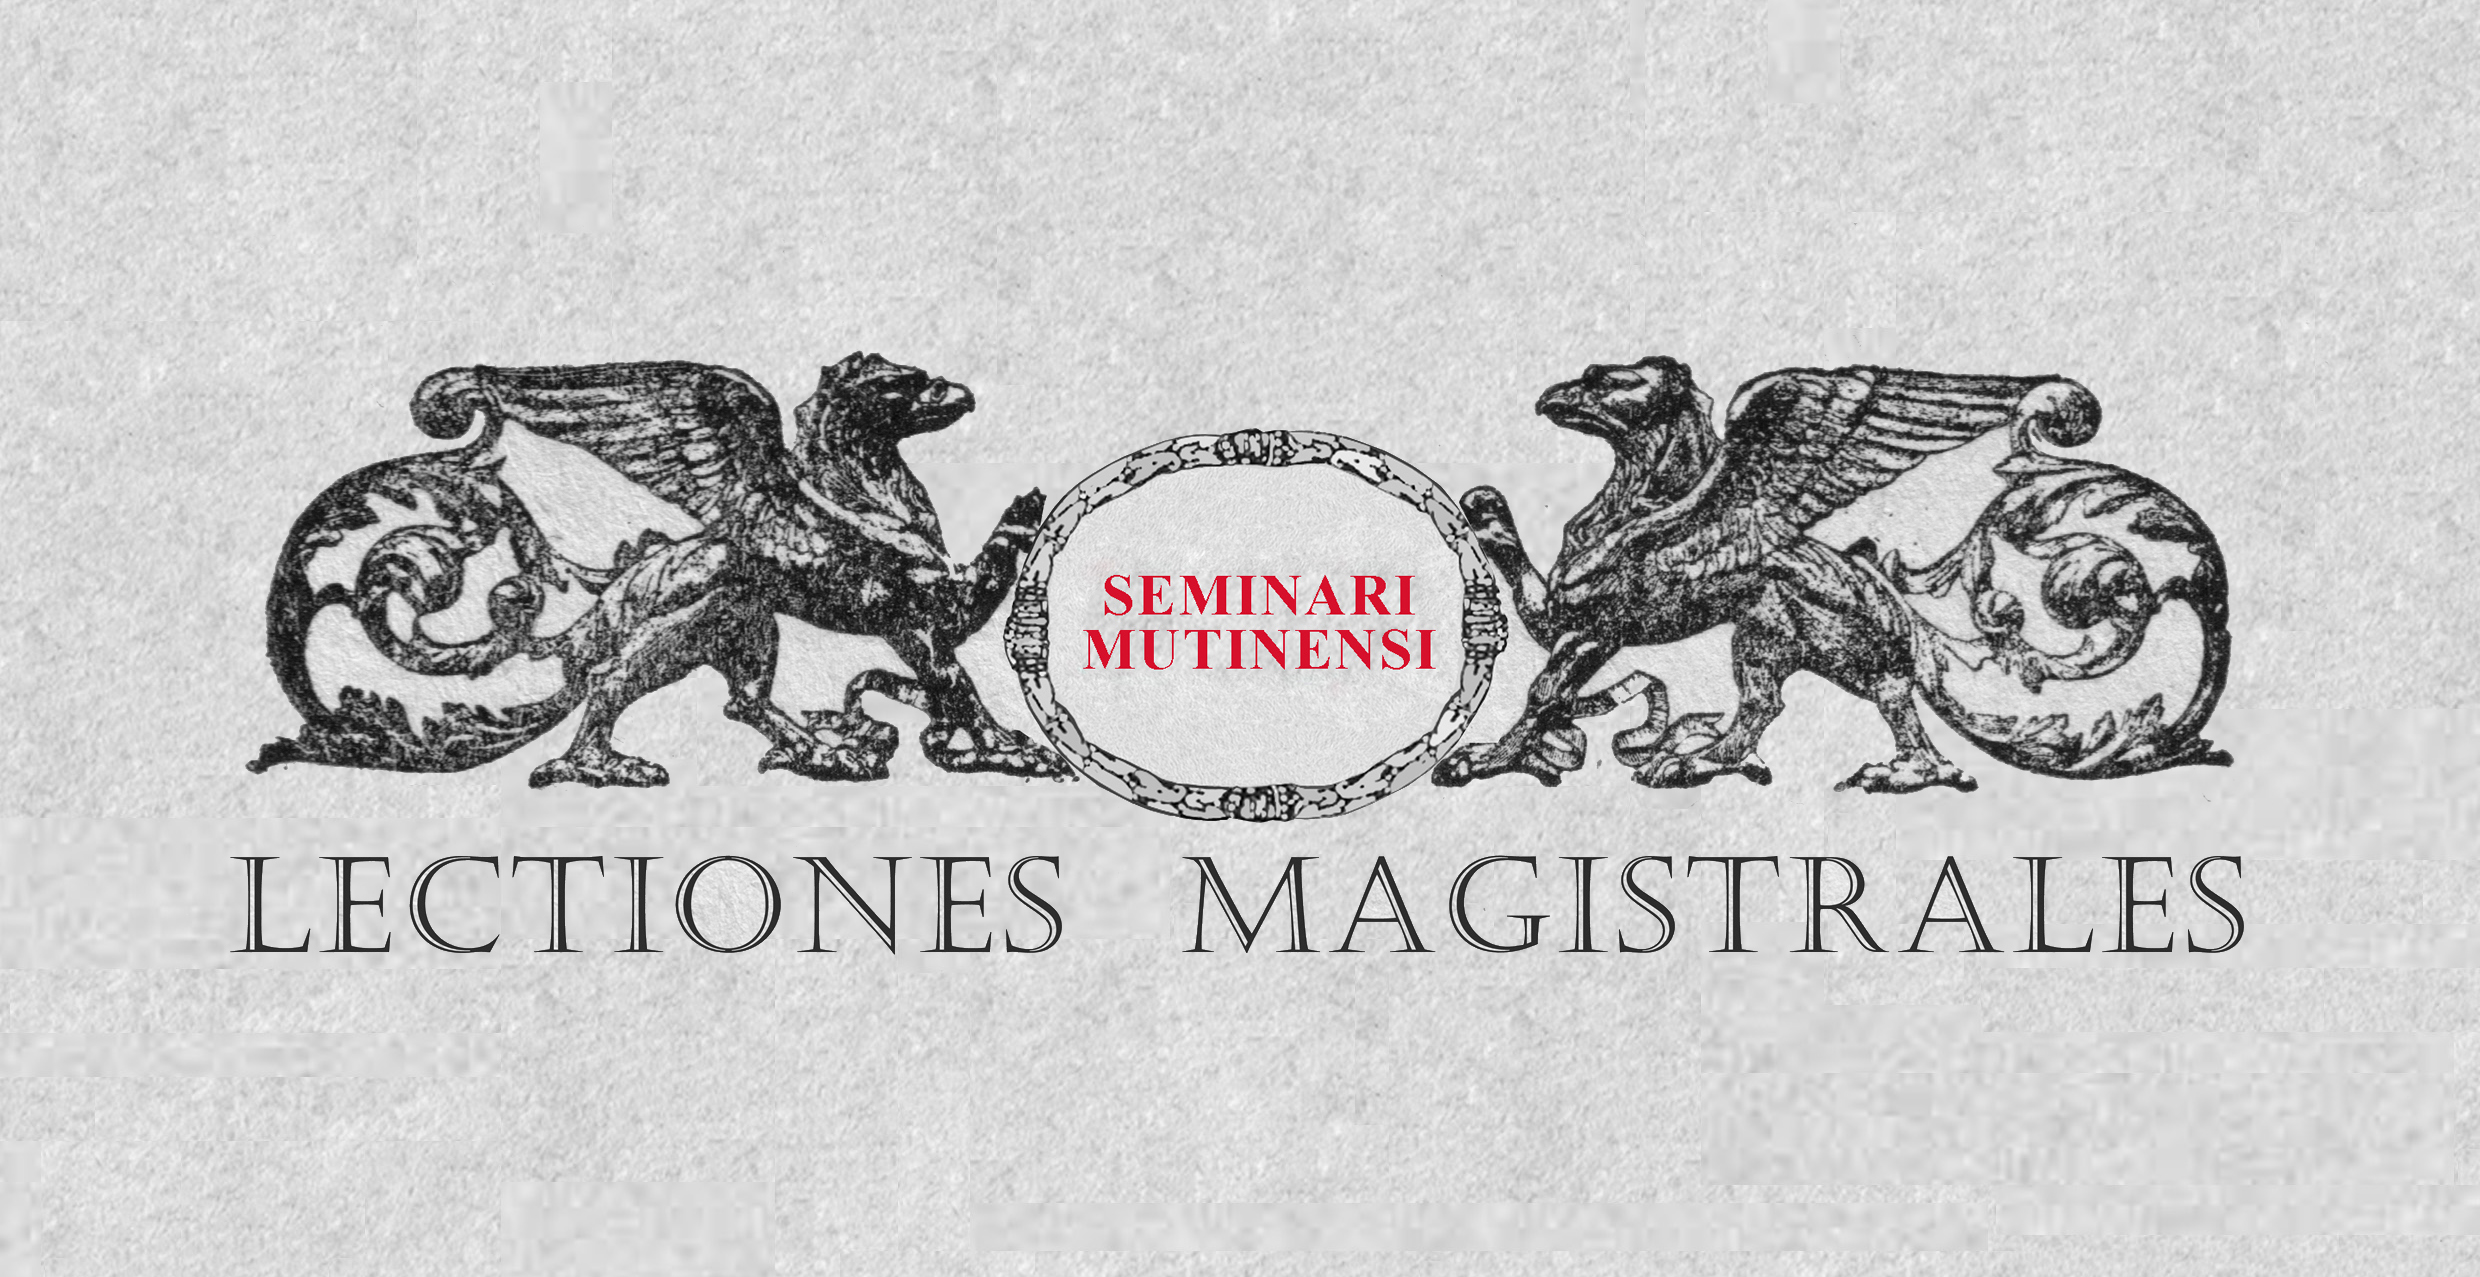 Lectiones Magistrales